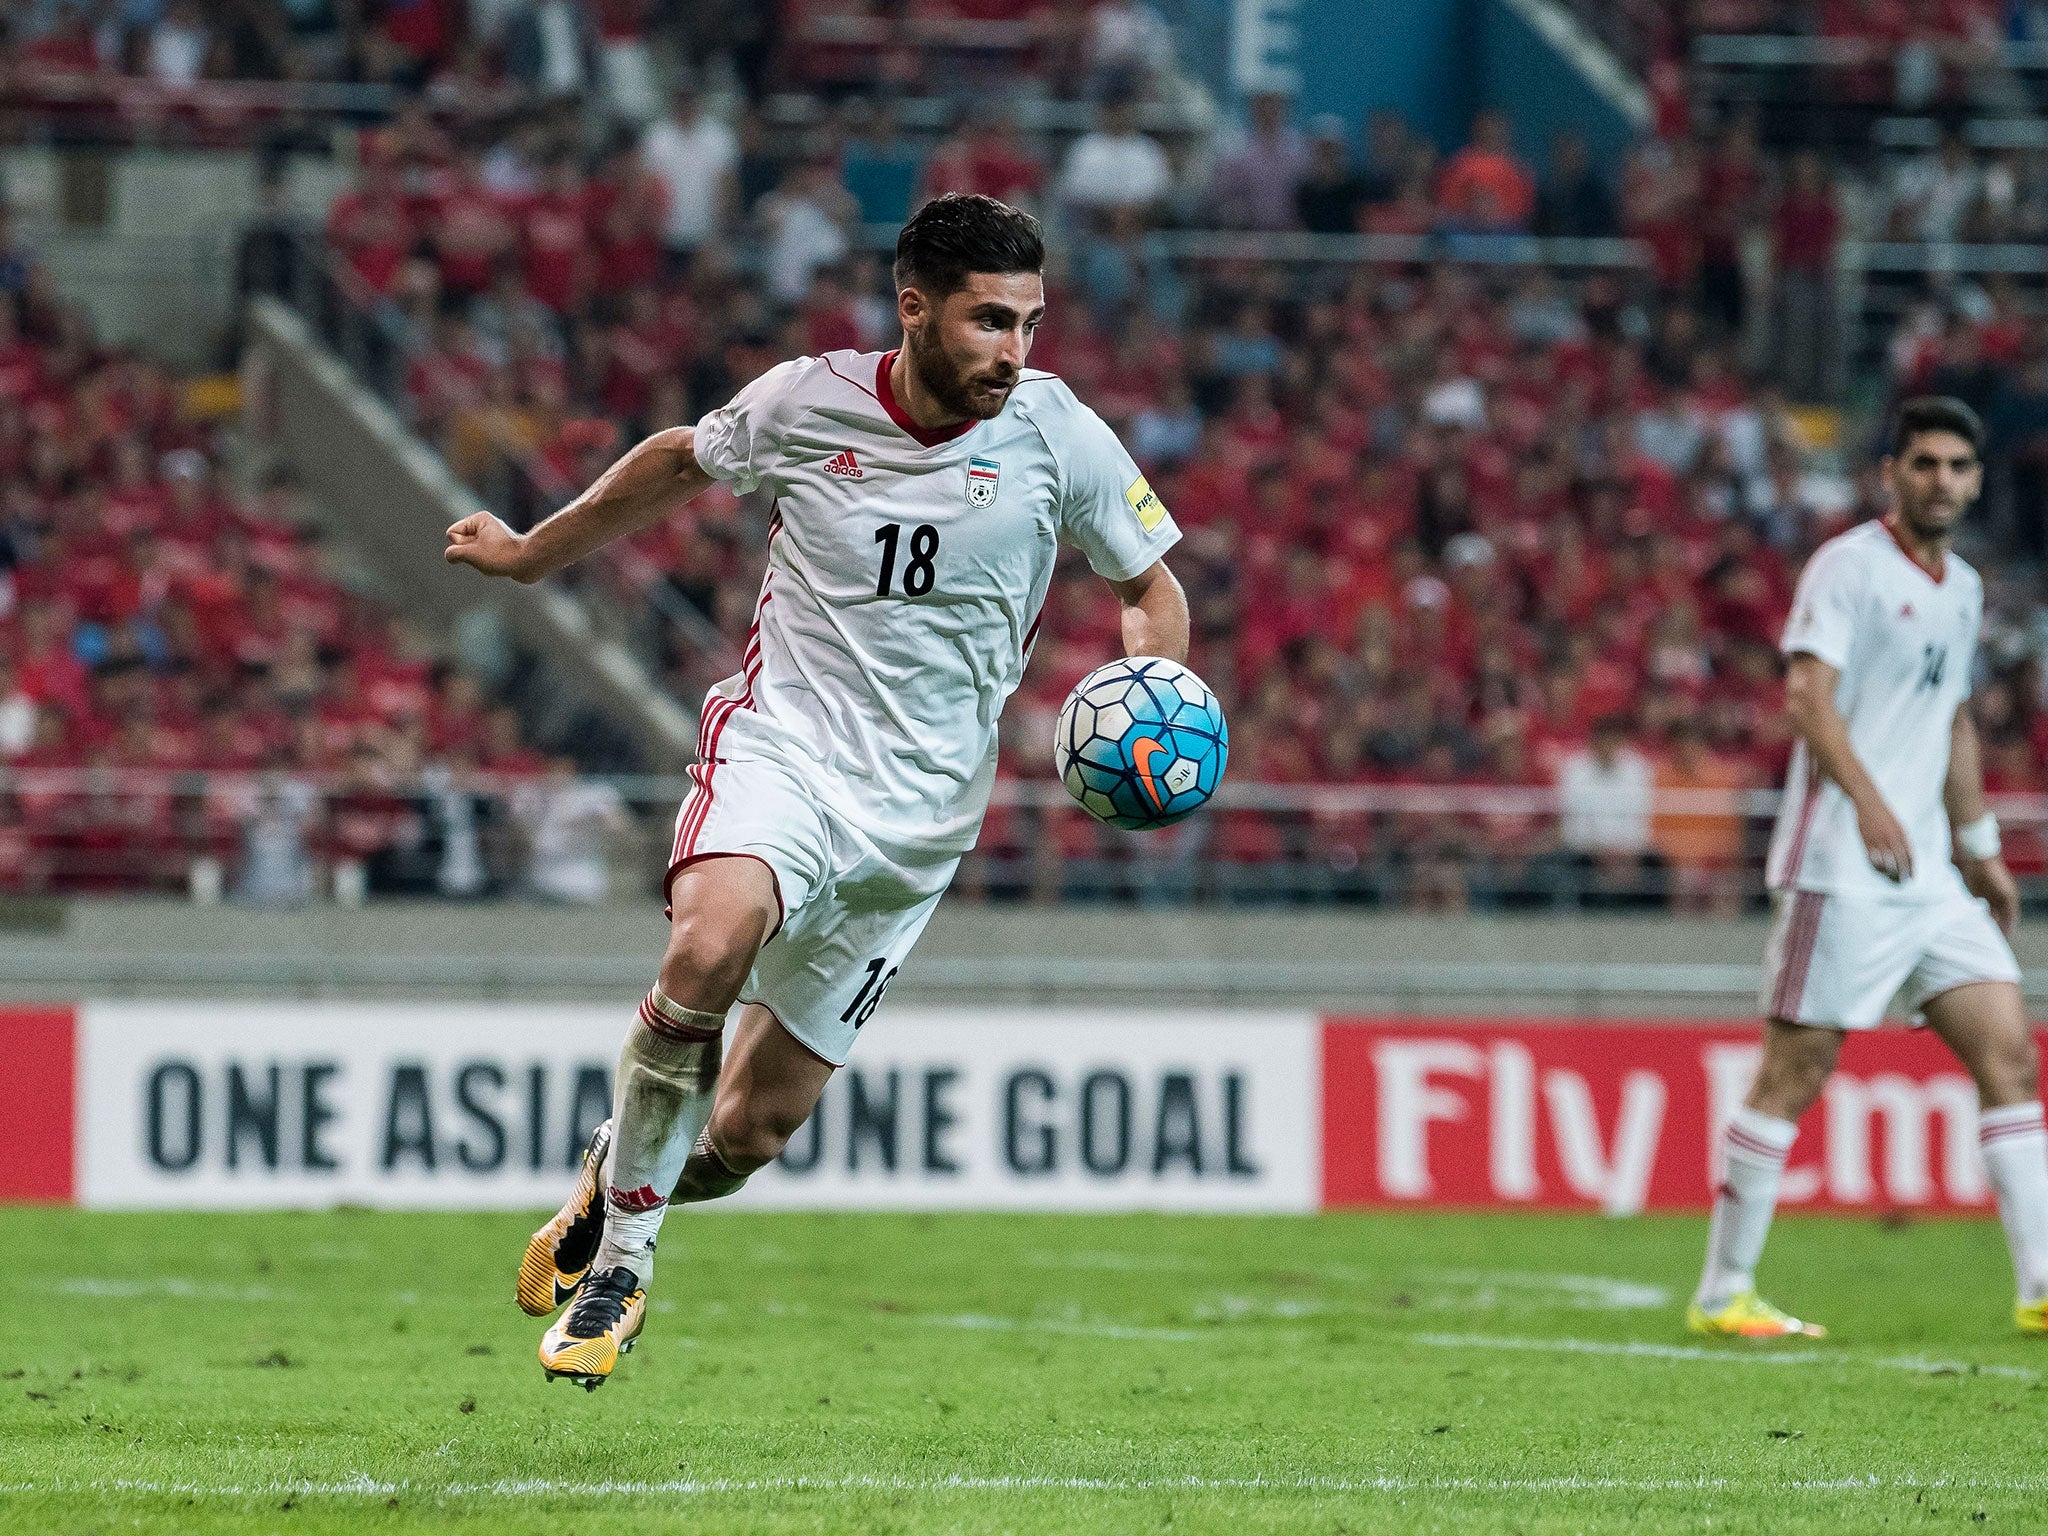 Iran's inclusion in the World Cup comes amid rising tensions in the Middle East